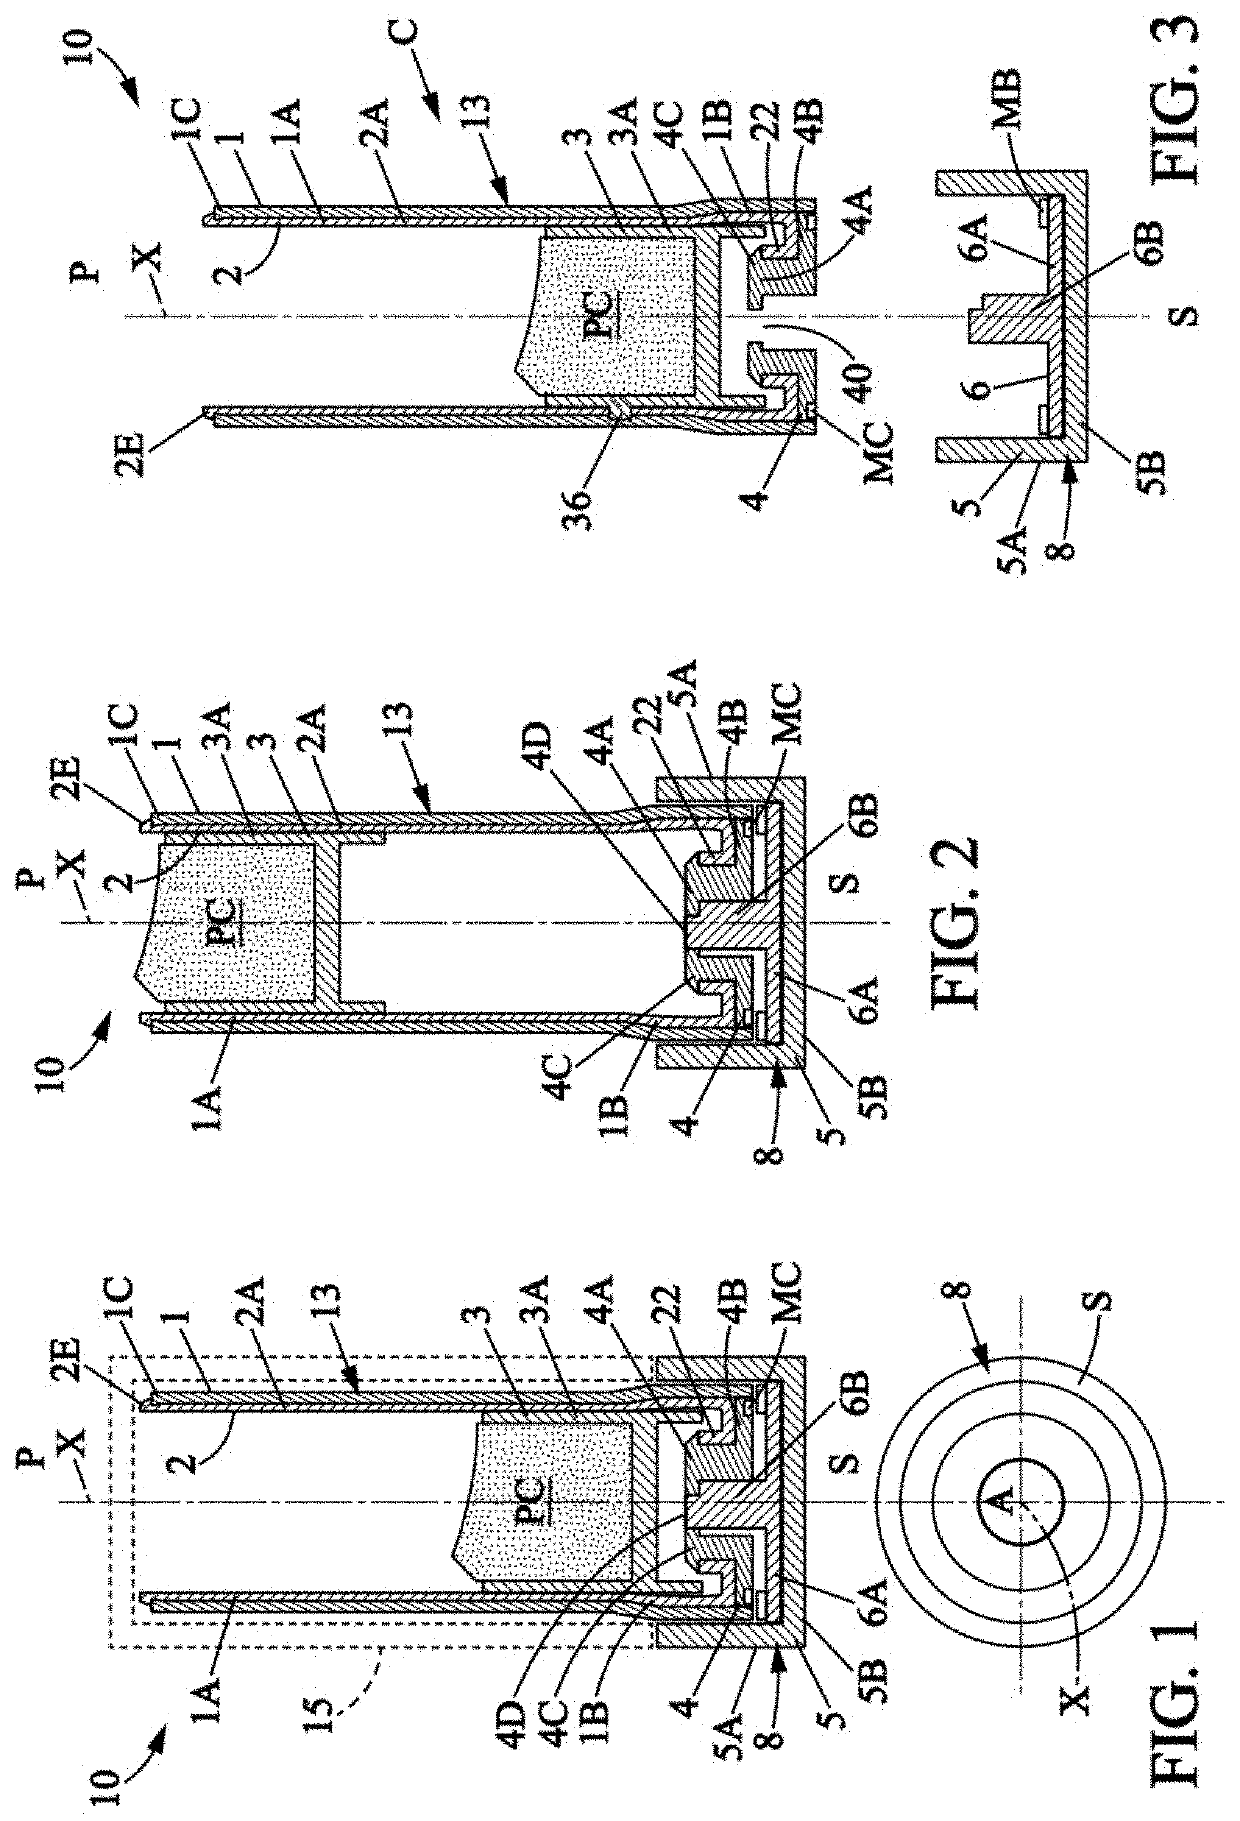 Cosmetic product dispensing device, comprising a base and a cartridge designed to be detachably intercoupled